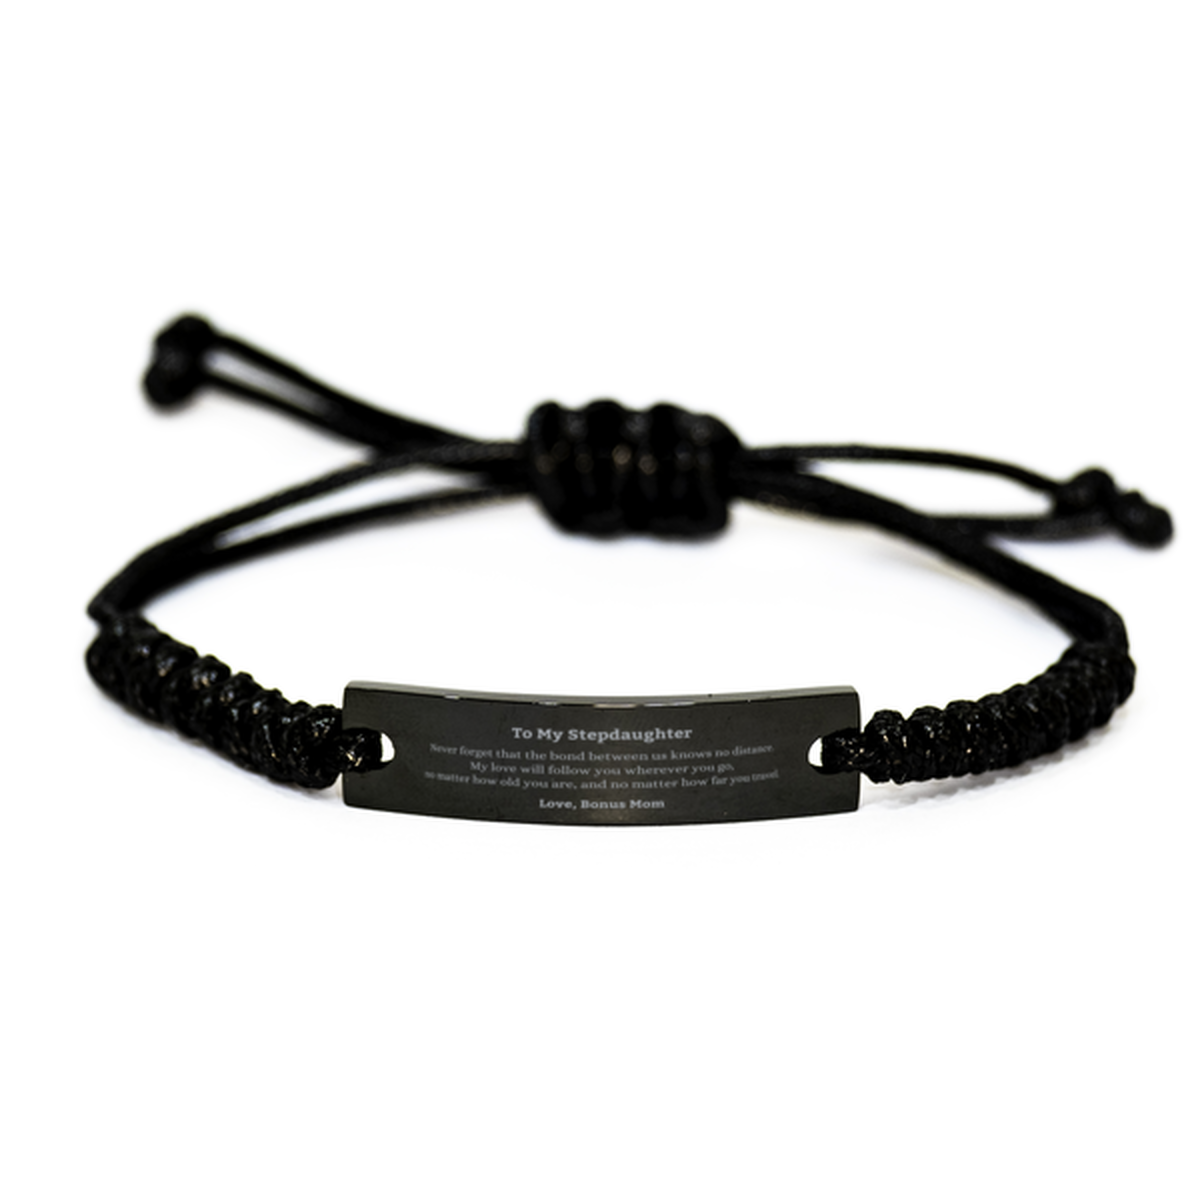 Stepdaughter Birthday Gifts from Bonus Mom, Adjustable Black Rope Bracelet for Stepdaughter Christmas Graduation Unique Gifts Stepdaughter Never forget that the bond between us knows no distance. Love, Bonus Mom